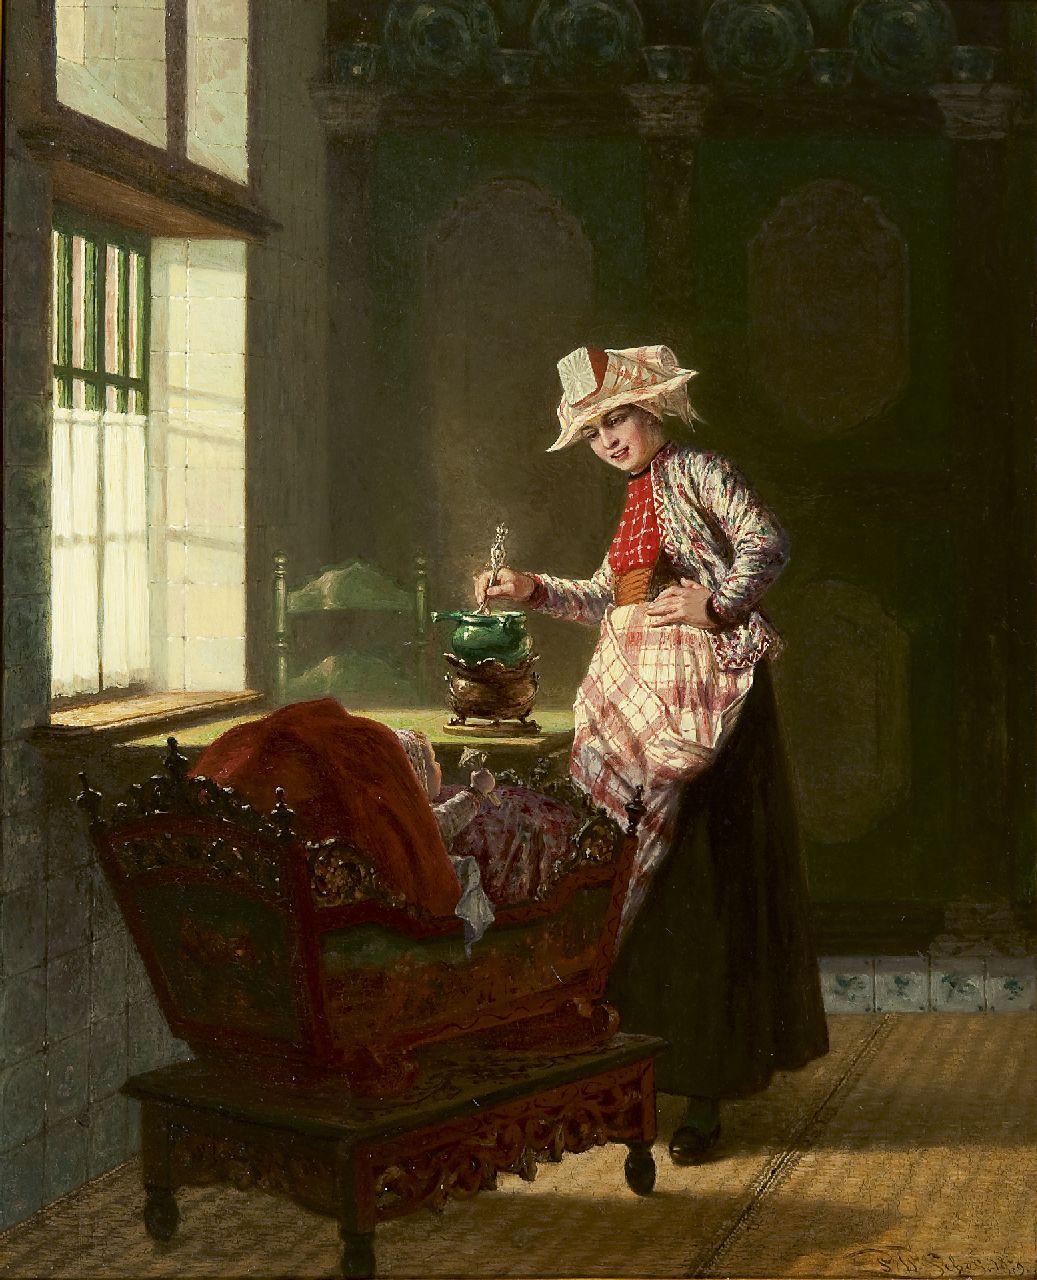 Sebes P.W.  | Pieter Willem Sebes, An interior in Hindeloopen with mother and child, Öl auf Holz 55,9 x 45,3 cm, signed l.r. und dated 1879